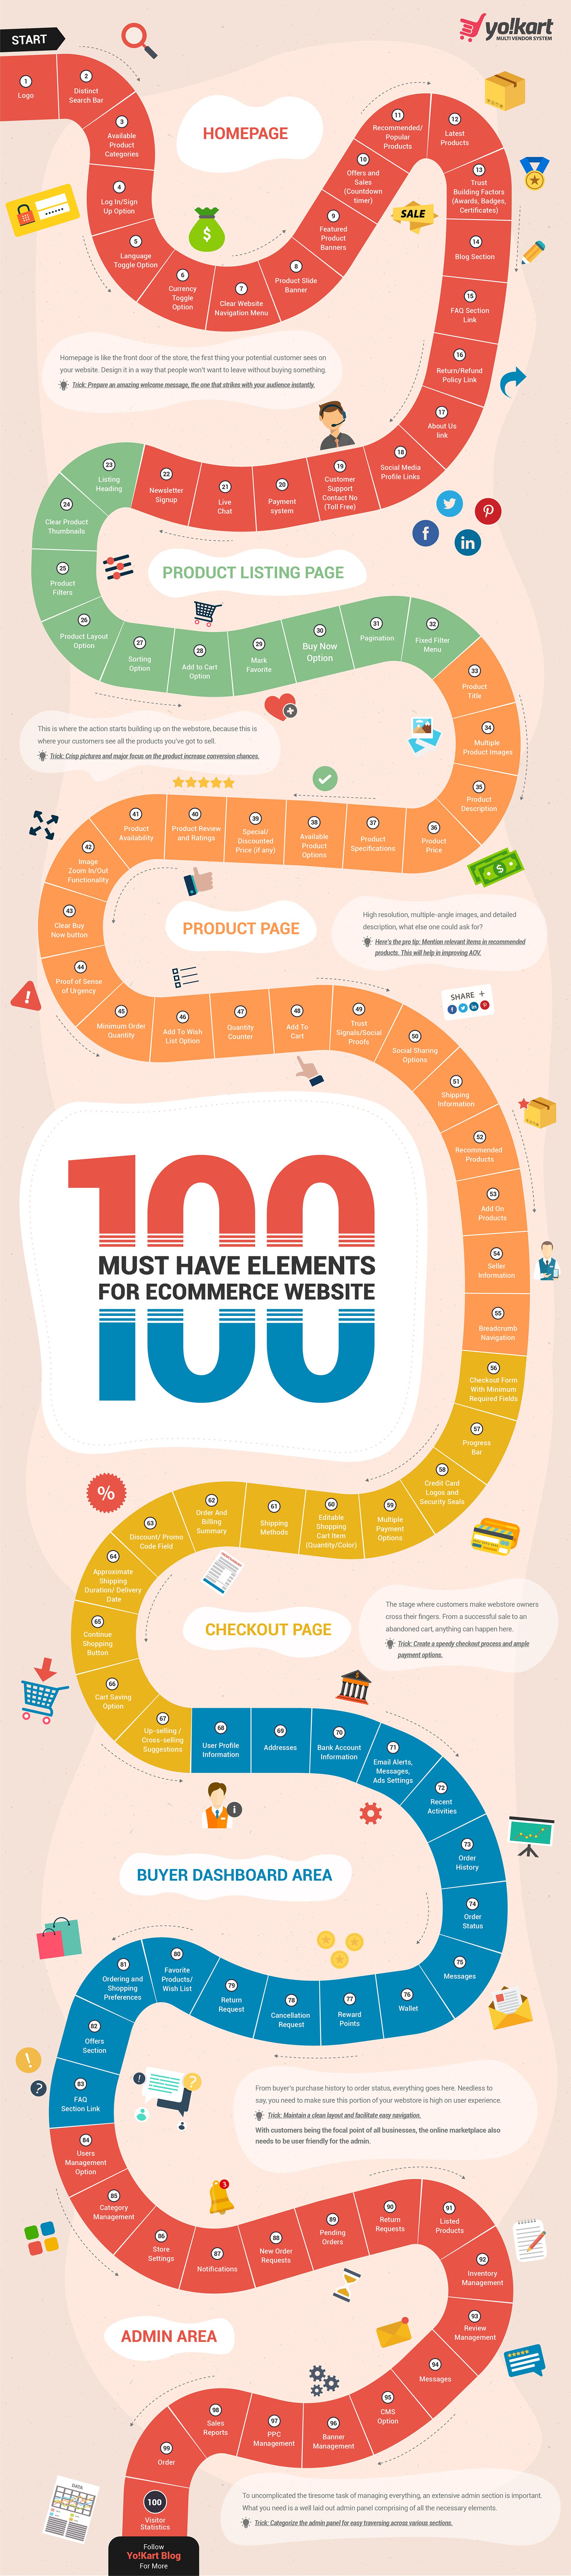 100 Elements of an Ecommerce Website (Infographic)